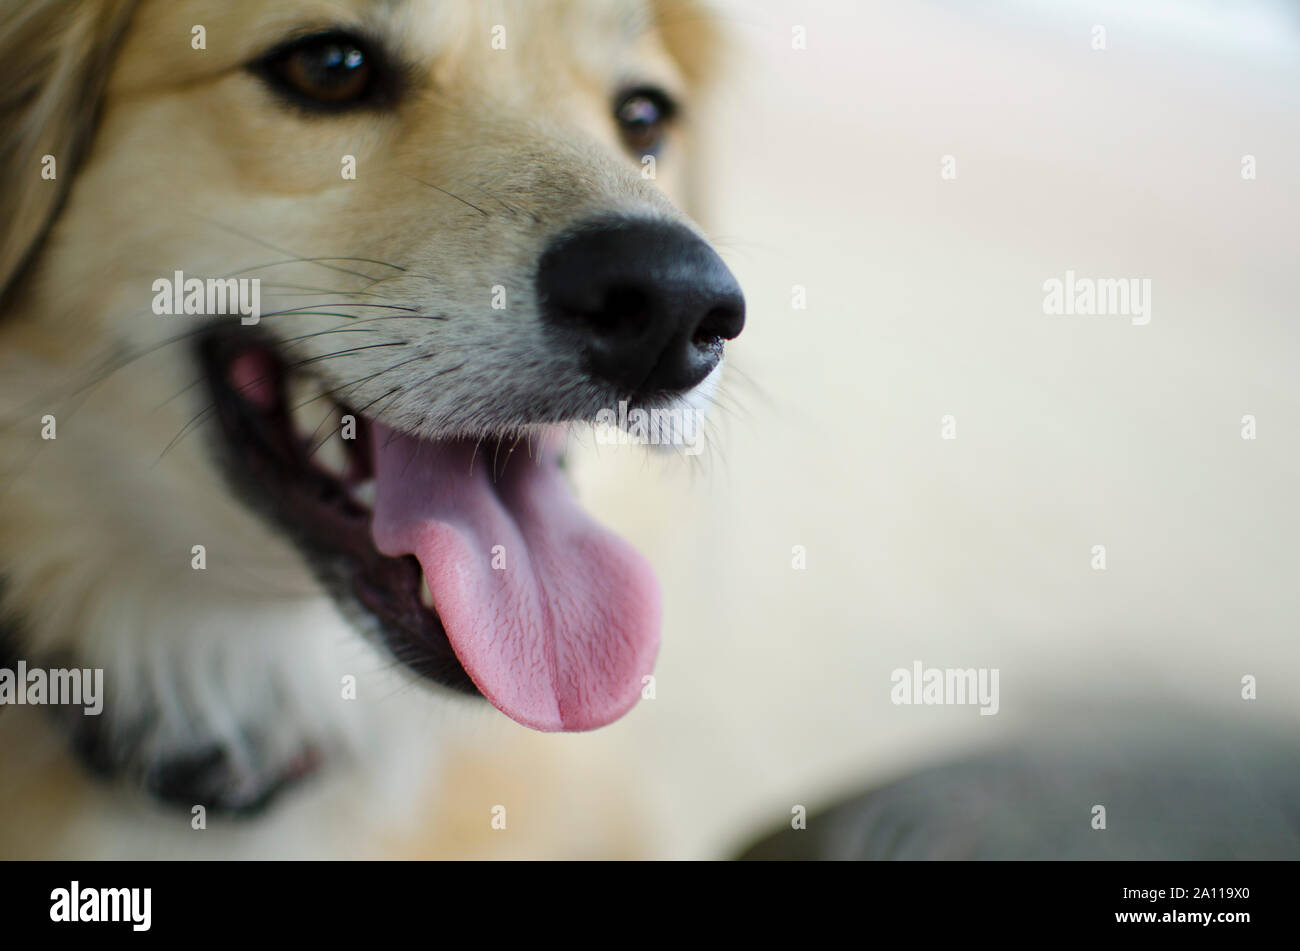 close up of a blonde or golden haired cute friendly dog smiling or looking at the camera with bokeh effect and sharp on tongue and nose. Stock Photo